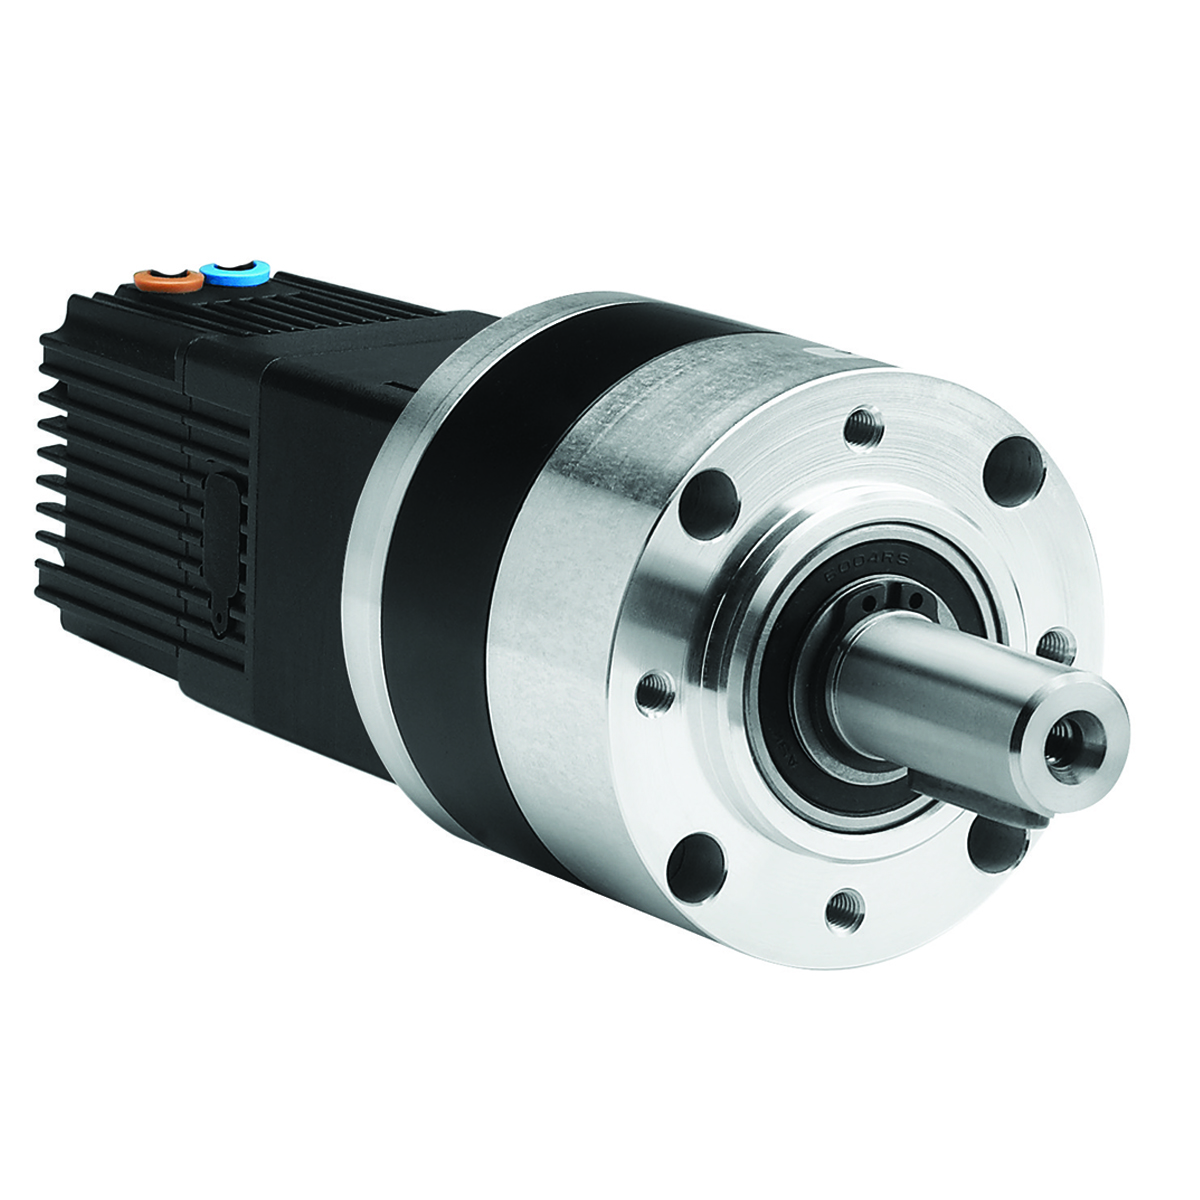 SQ57 Motor 150W 12-32Vdc + Drive TNi21 PWM + Gearbox P81 - 3 stages ratio 139.13-1